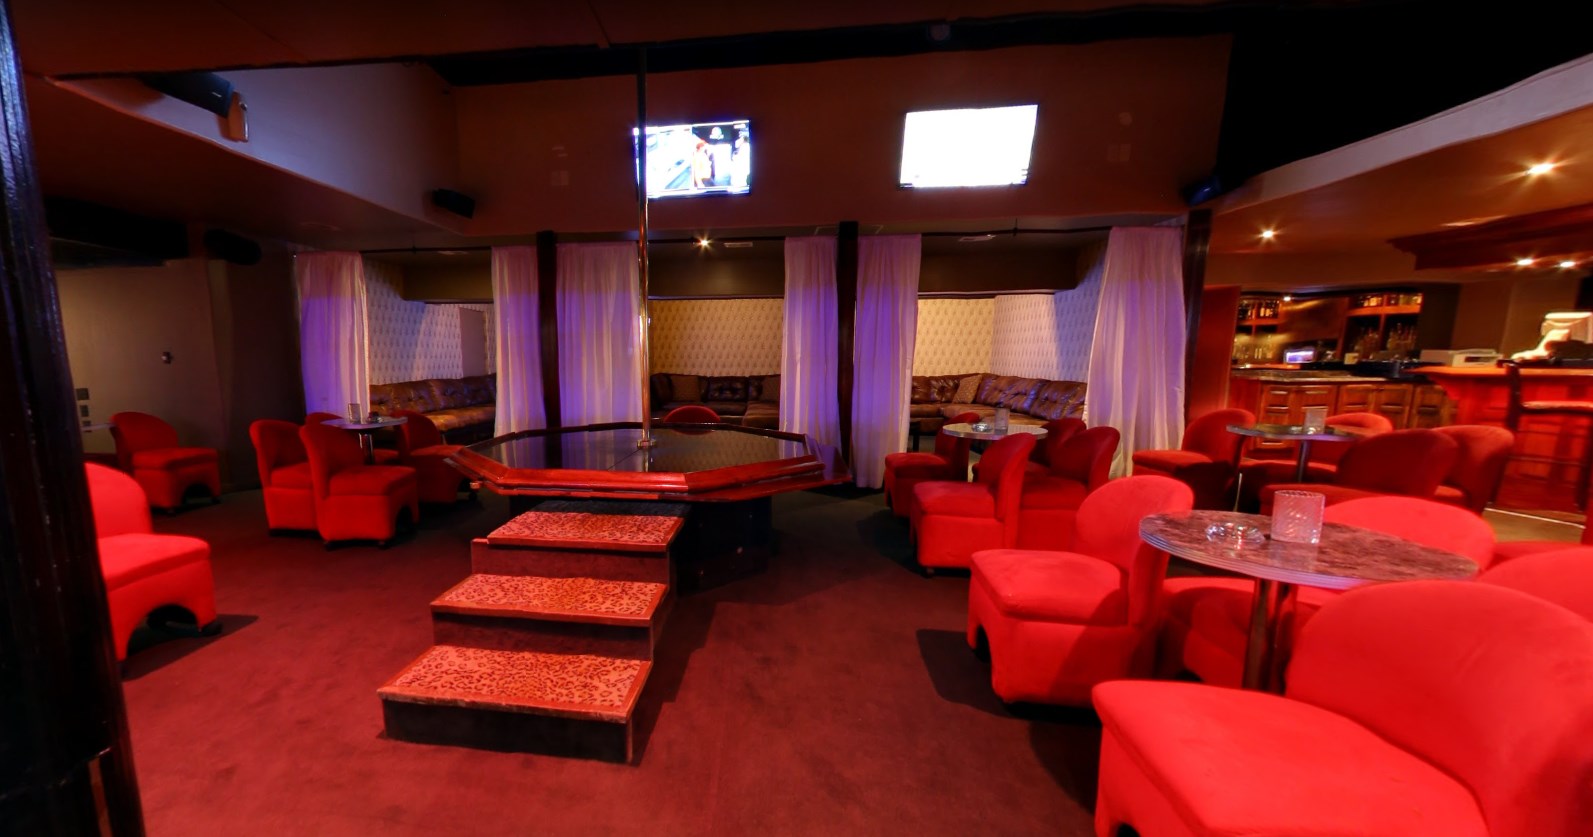 Thee Doll House - Myrtle Beach, Atlantic Beach and 3+ Best Nightclubs pic